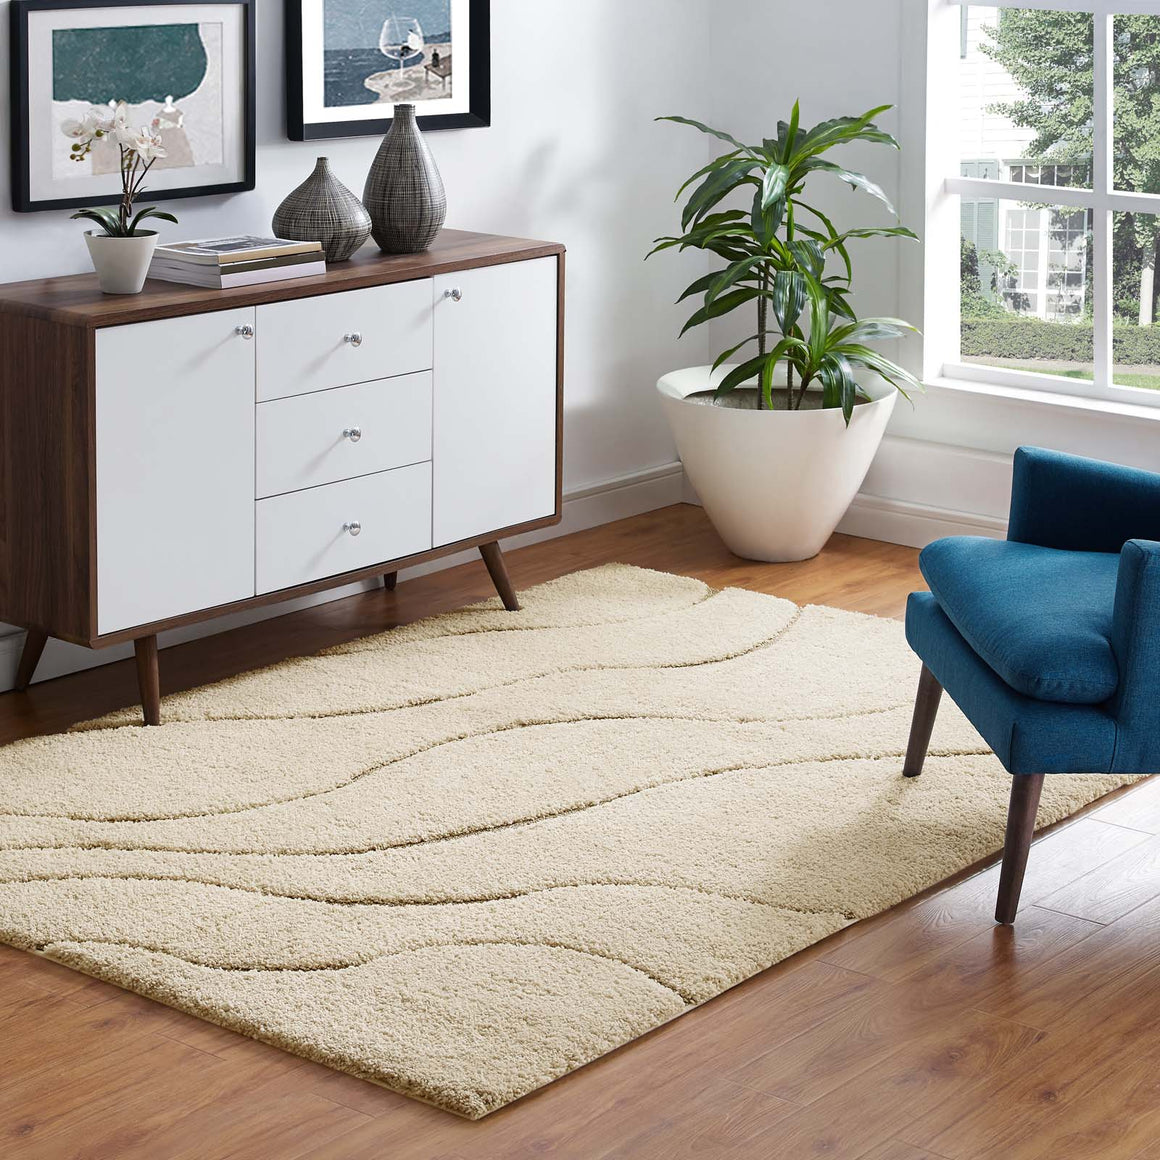 Abound Abstract Swirl 5x8 Shag Area Rug  Creame and Beige